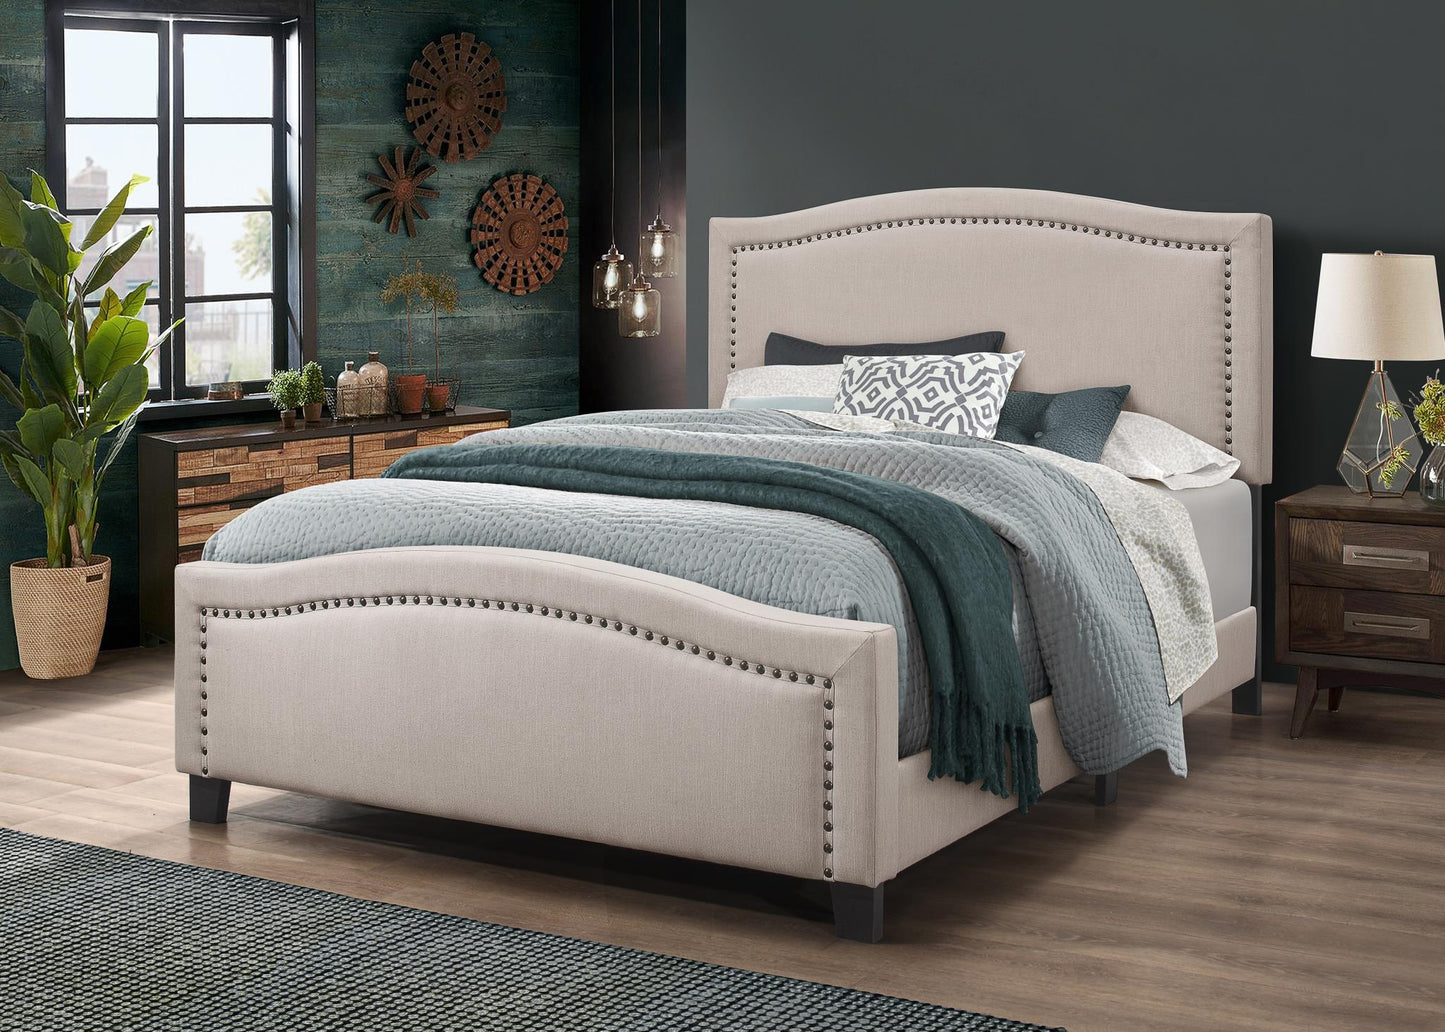 WEEKLY or MONTHLY. Lisa Queen Bed